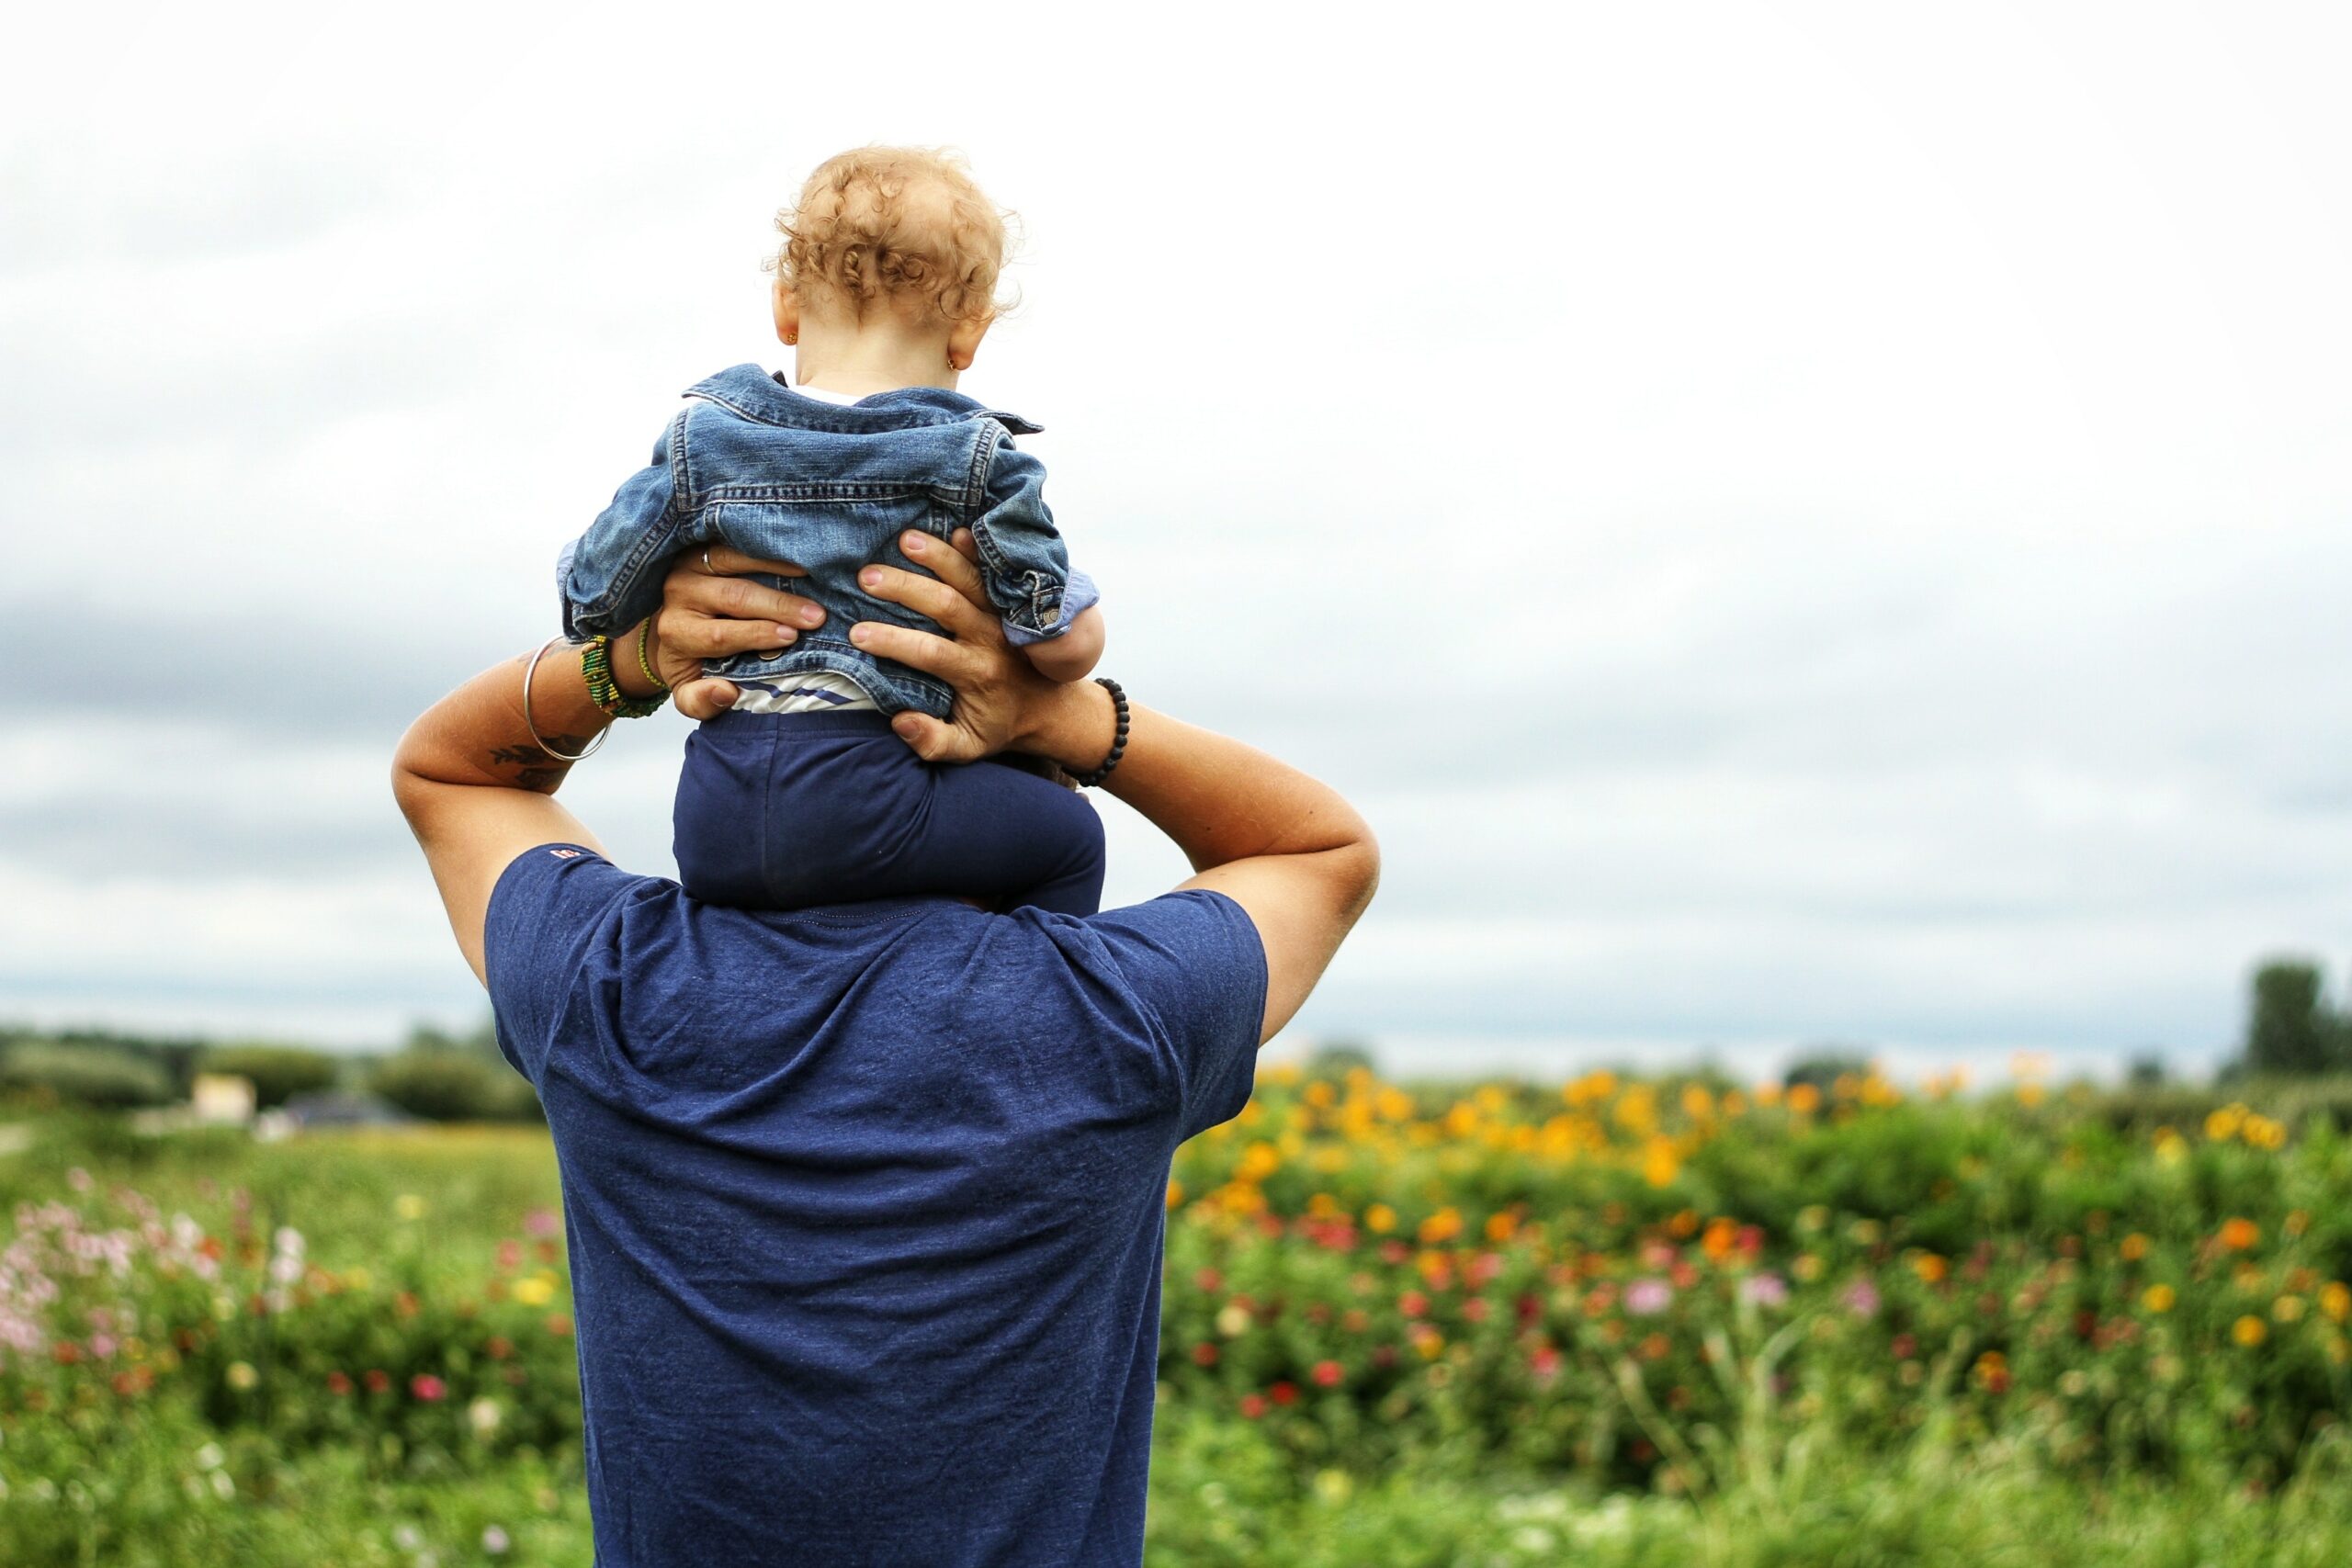 child custody rights for fathers